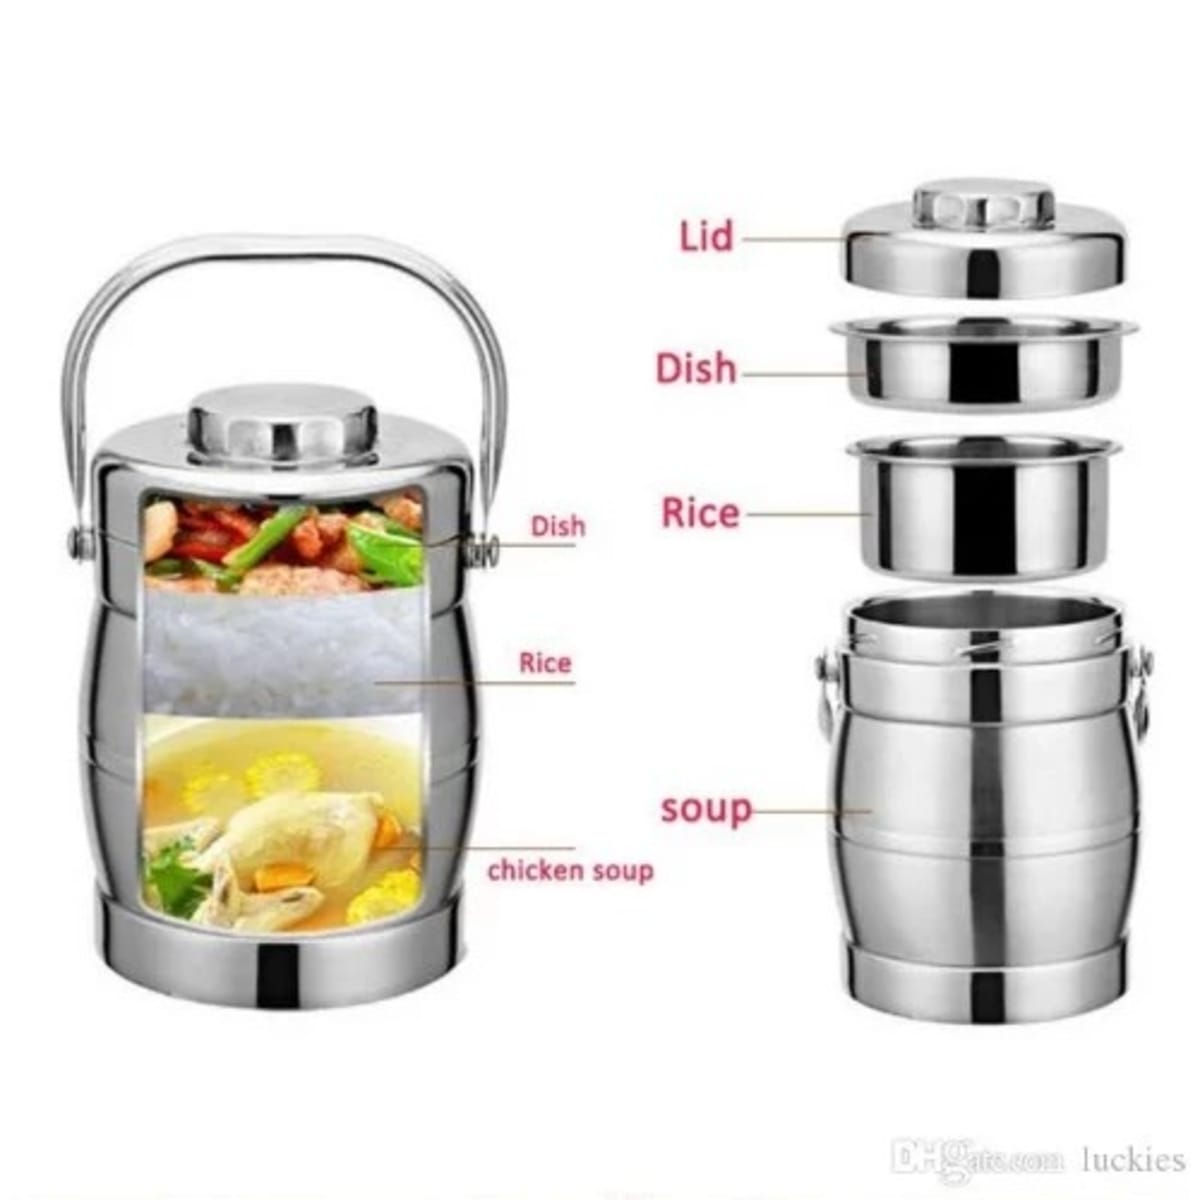 The Food Flask